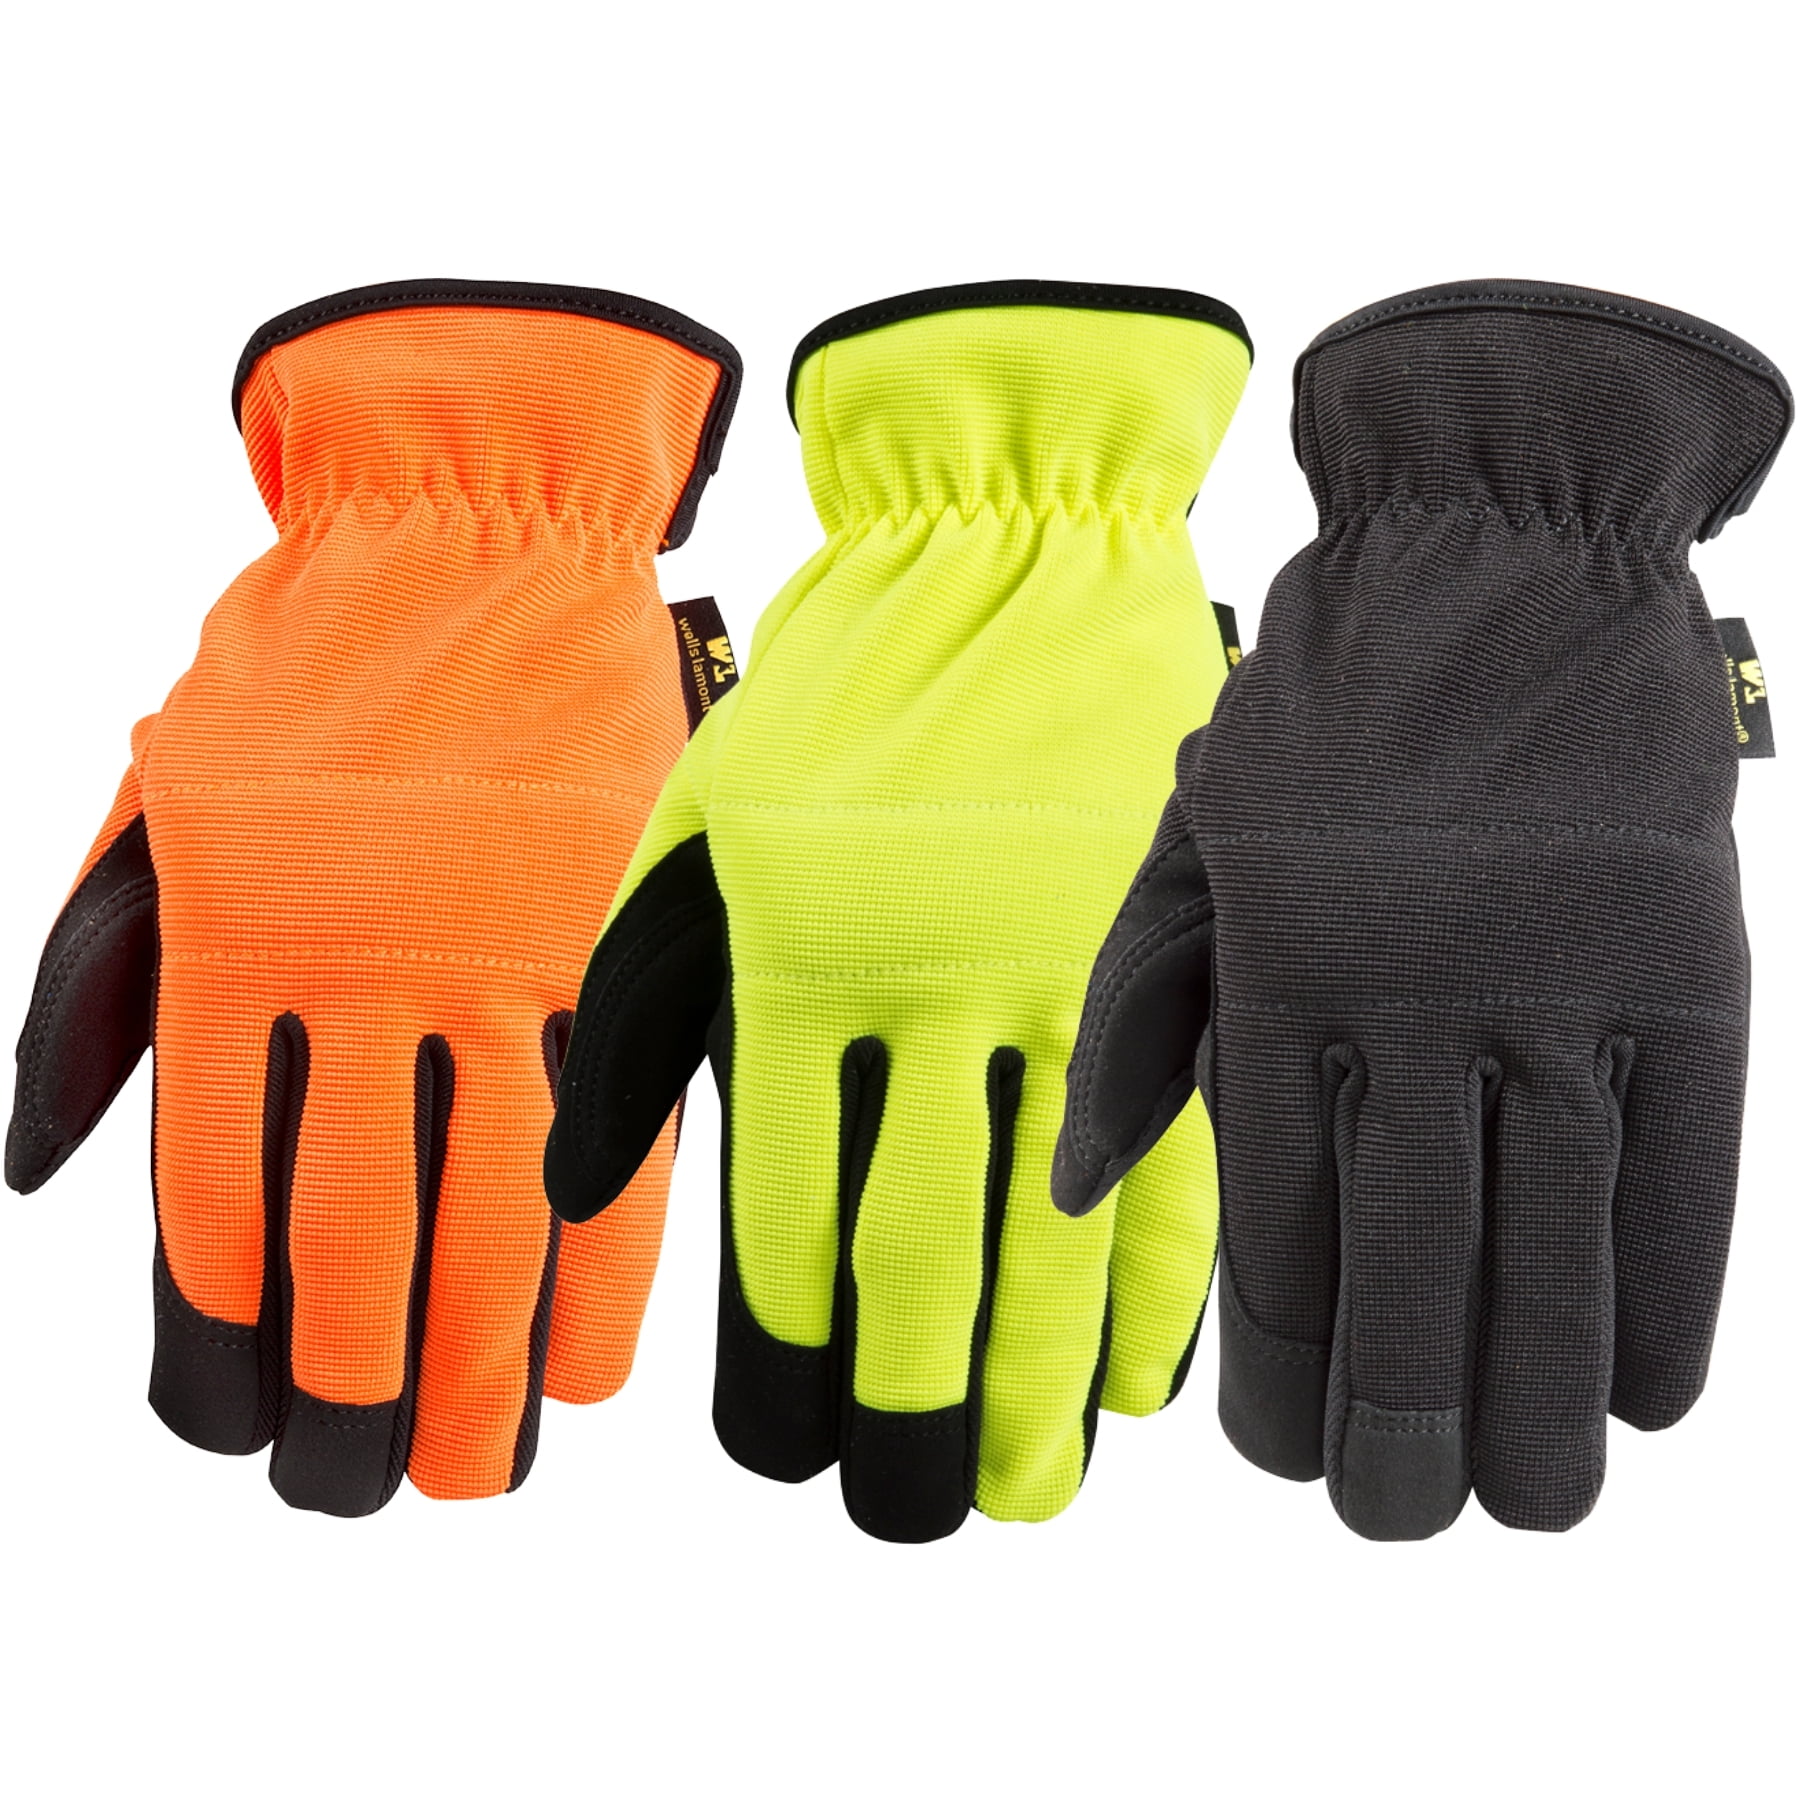 Mens Working Gloves Synthetic Leather Utility Flexible Work Gloves Breathable 